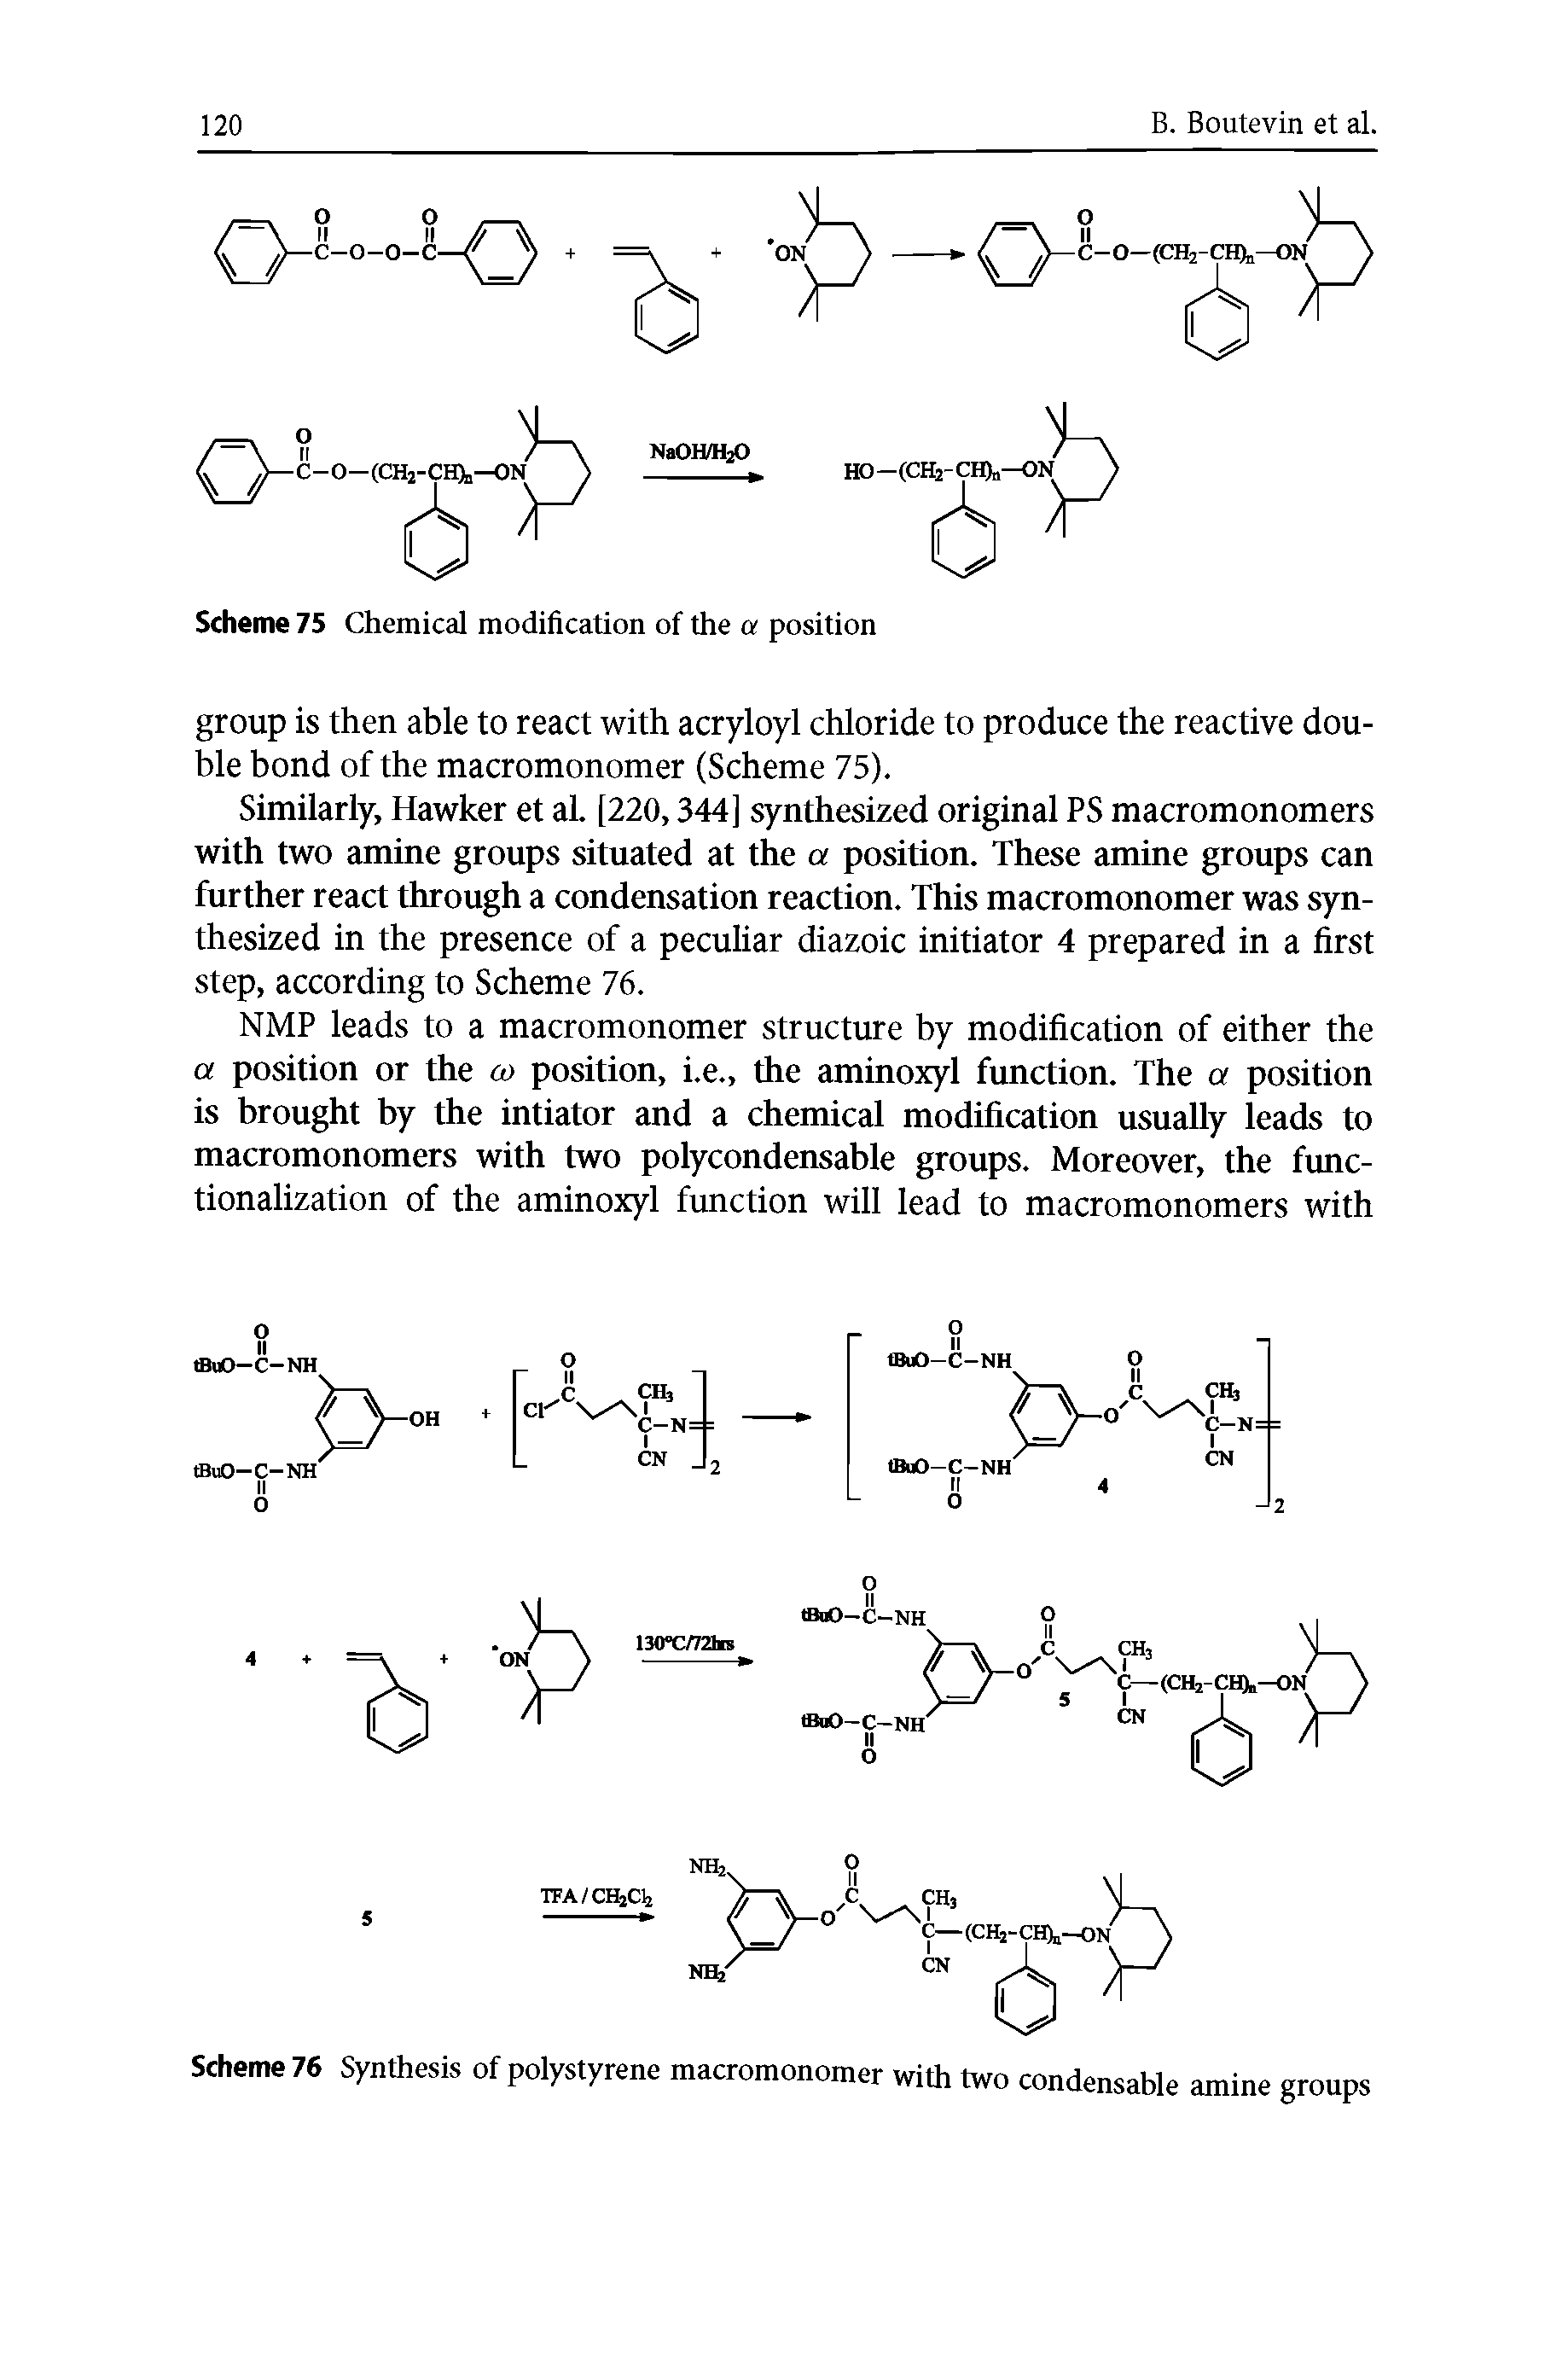 Scheme 76 Synthesis of polystyrene macromonomer with two condensable amine groups...